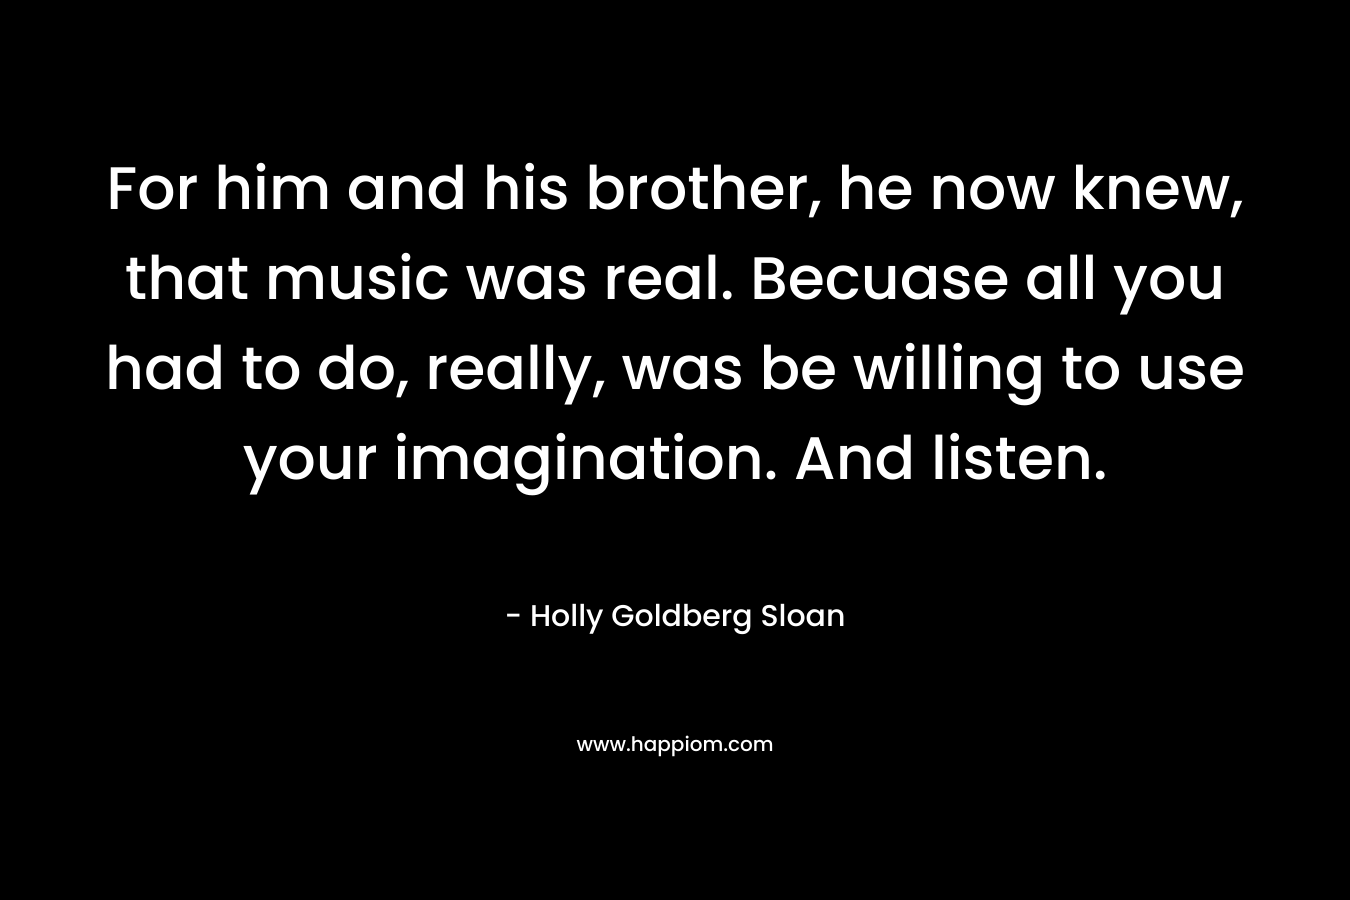 For him and his brother, he now knew, that music was real. Becuase all you had to do, really, was be willing to use your imagination. And listen.